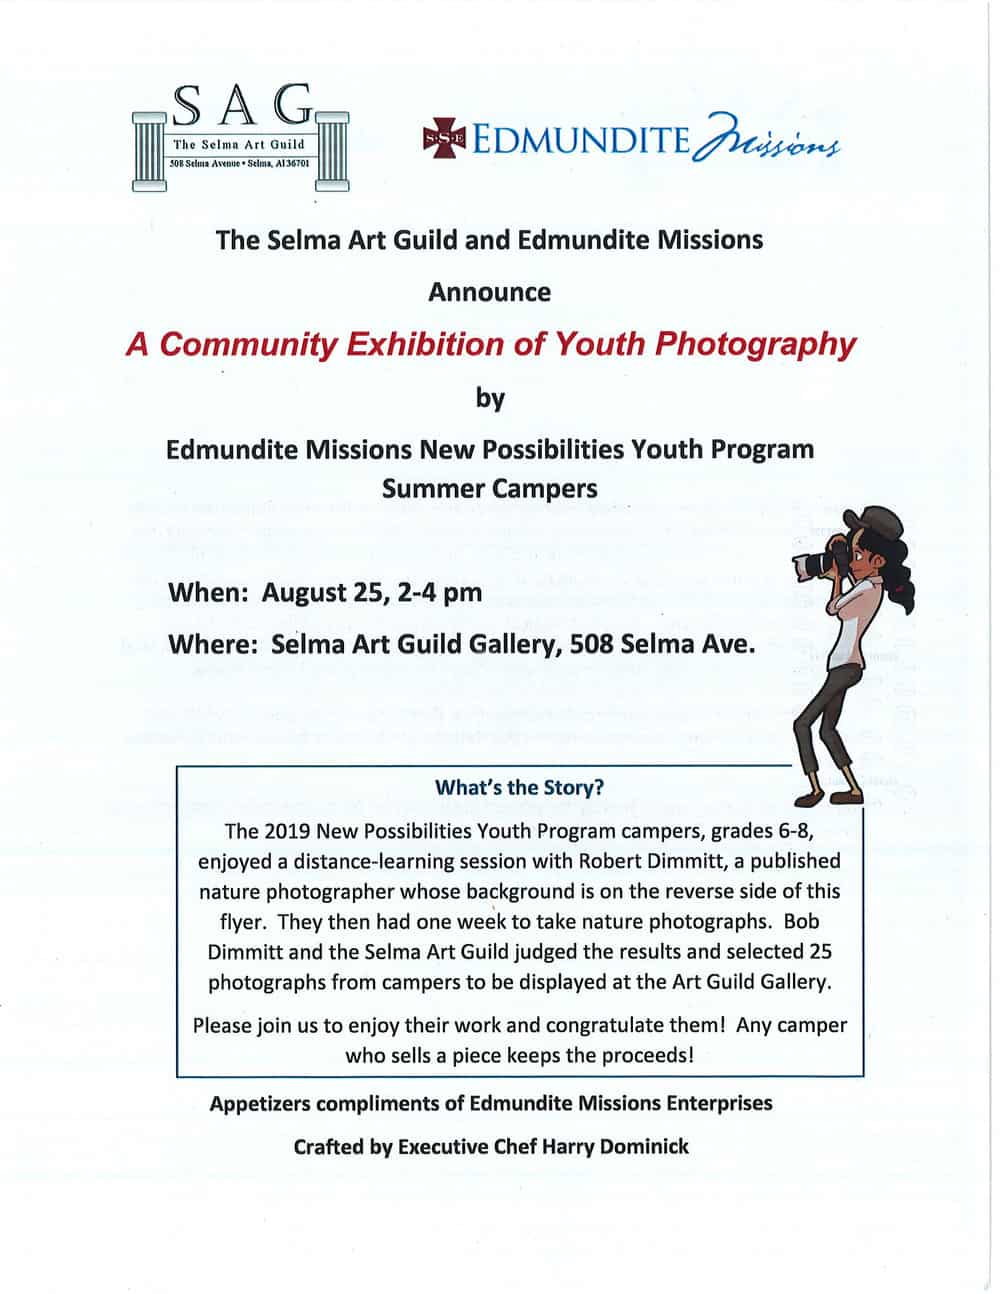 Community Exhibition of Youth Photography Page 1